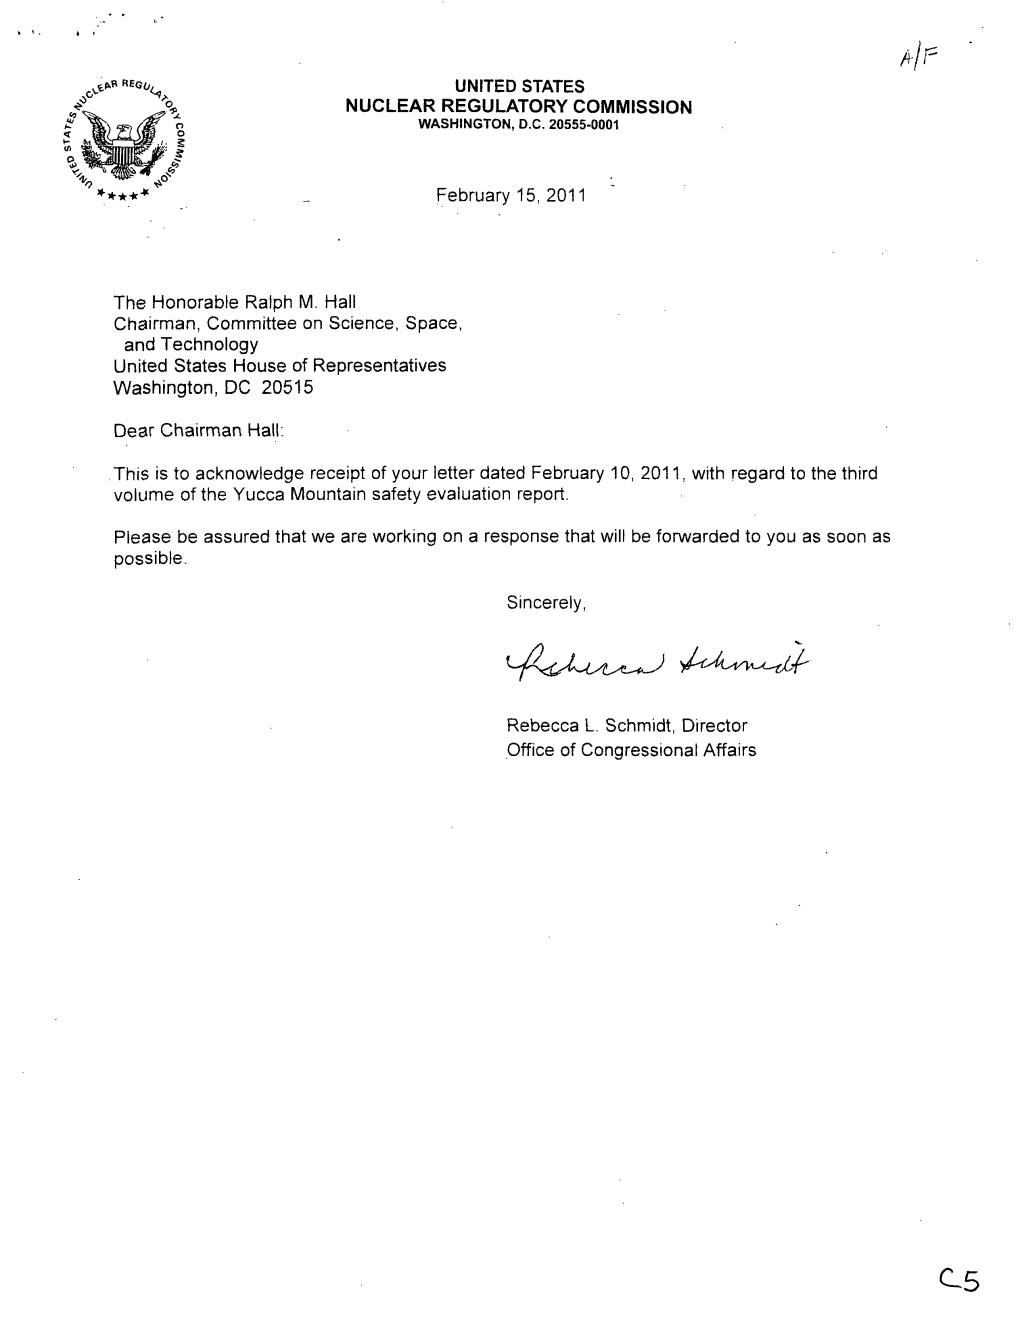 Acknowledgement Letters to Honorable Ralph M. Hall, United